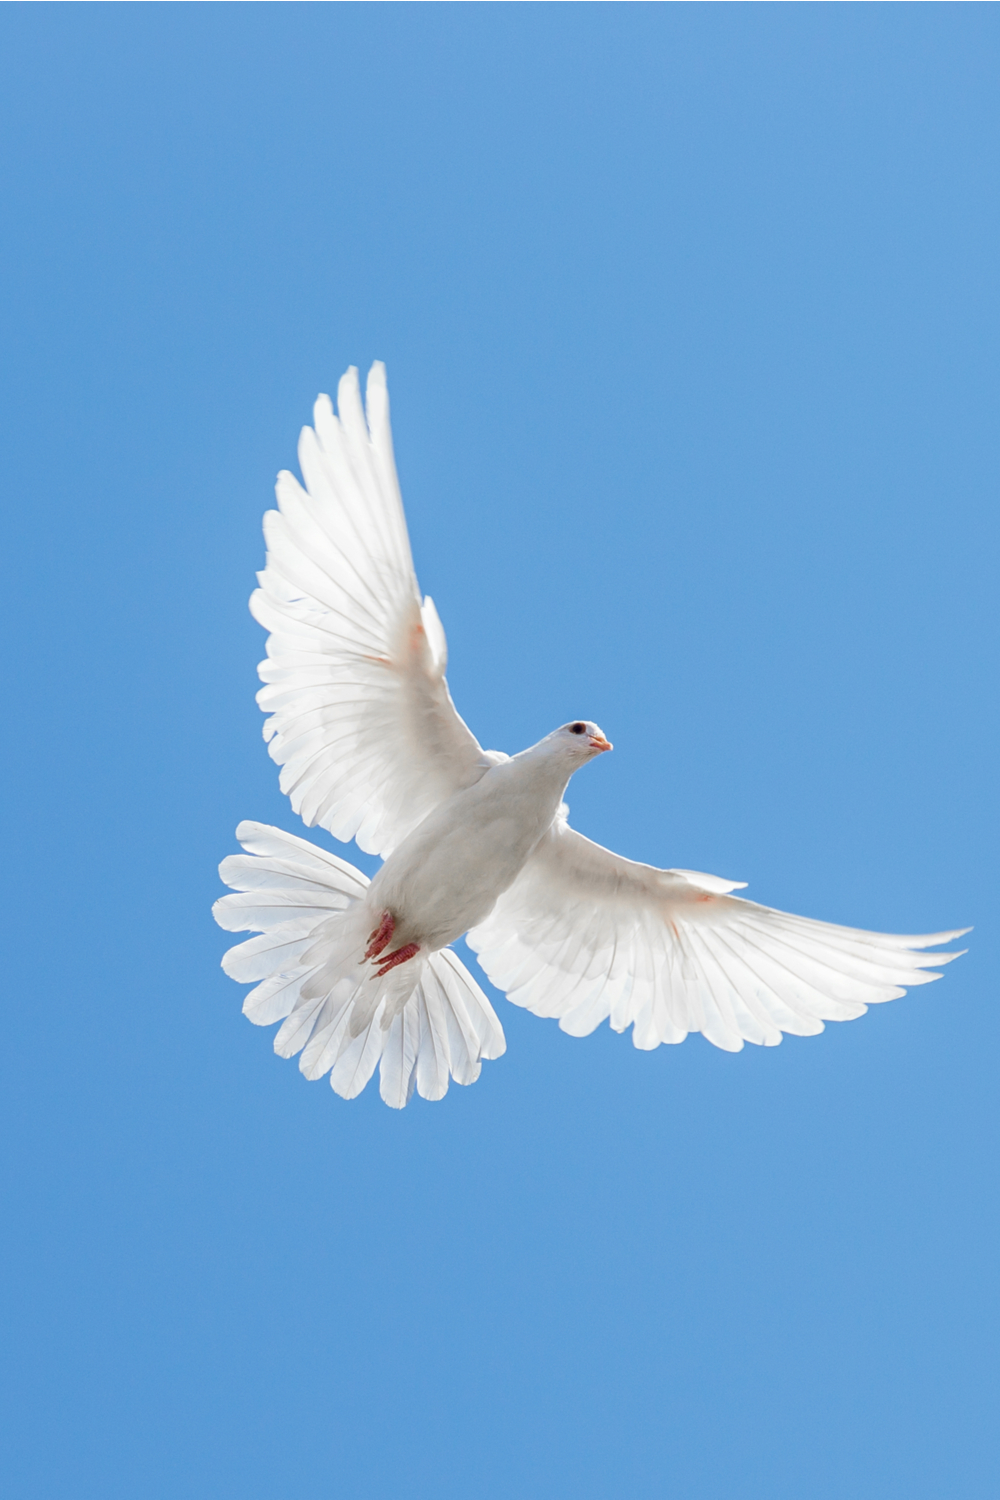 Dove symbolism according to different cultures and religions